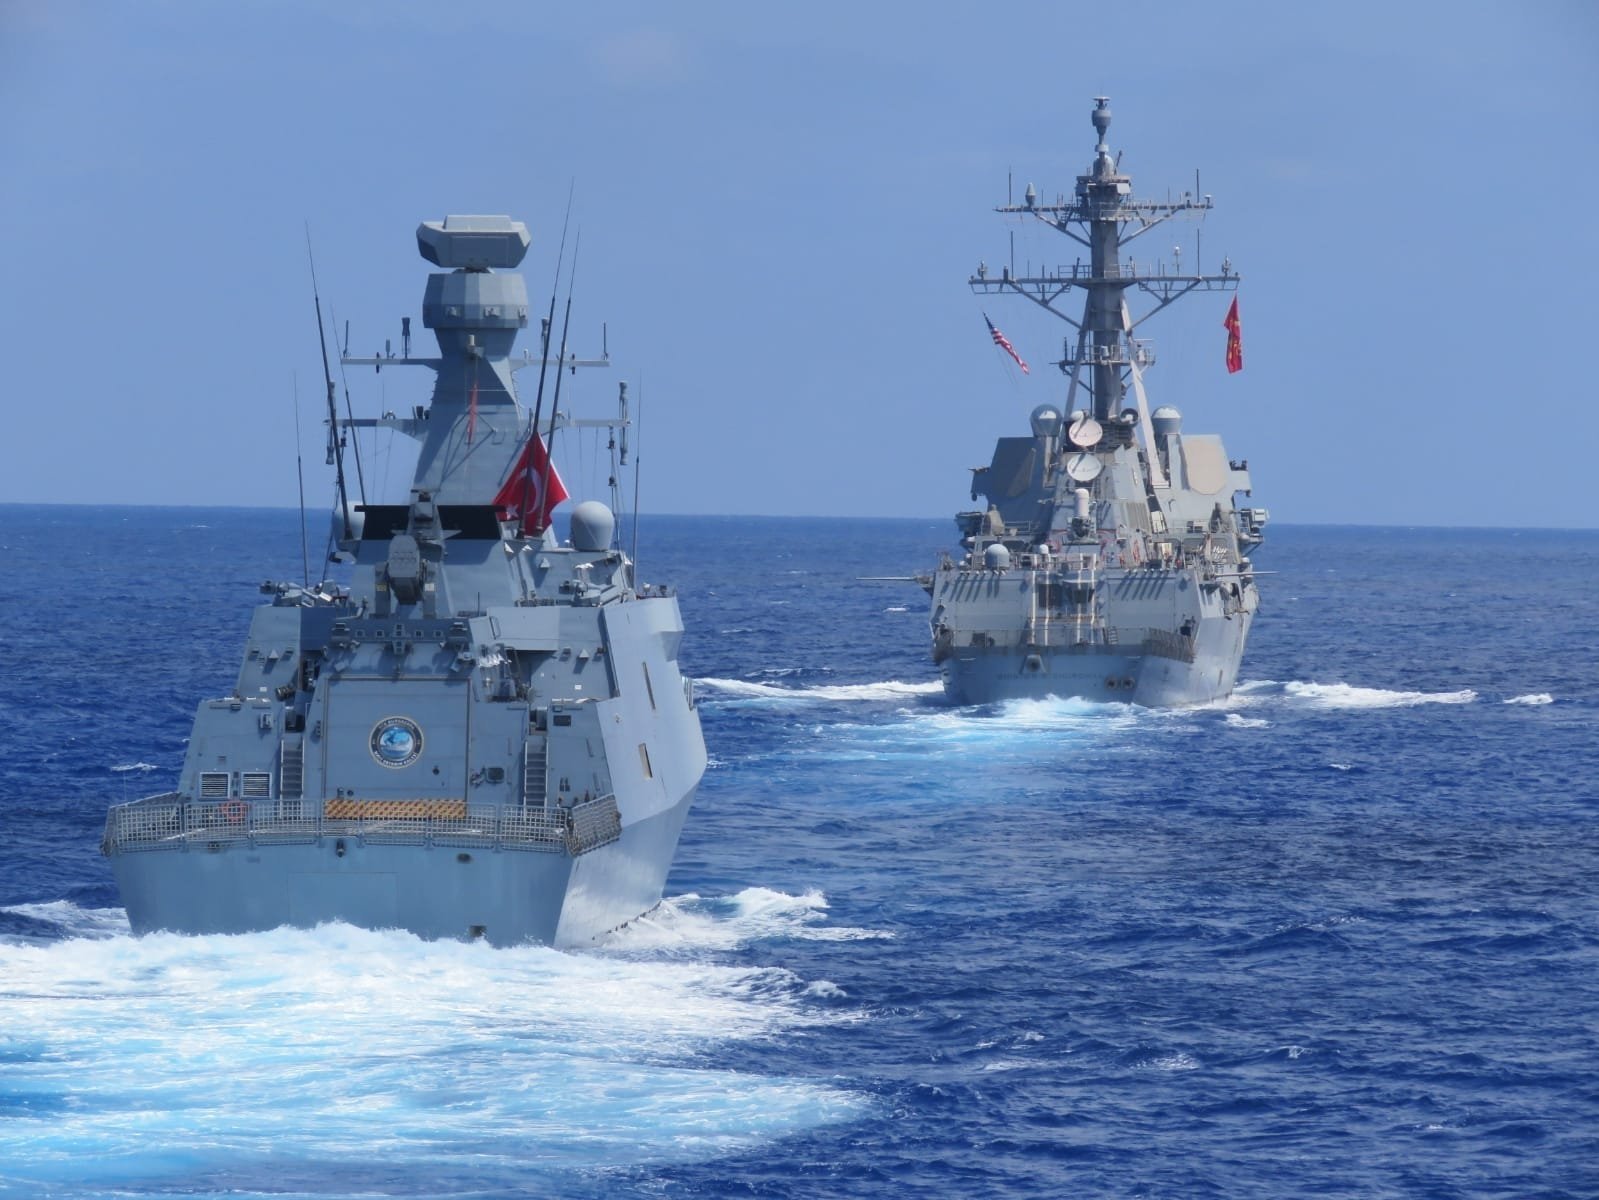 Turkish frigates TCG Barbaros and TCG Burgazada conducts maritime training with American destroyer USS Winston S. Churchill in the Eastern Mediterranean, Aug. 26, 2020. (DHA)